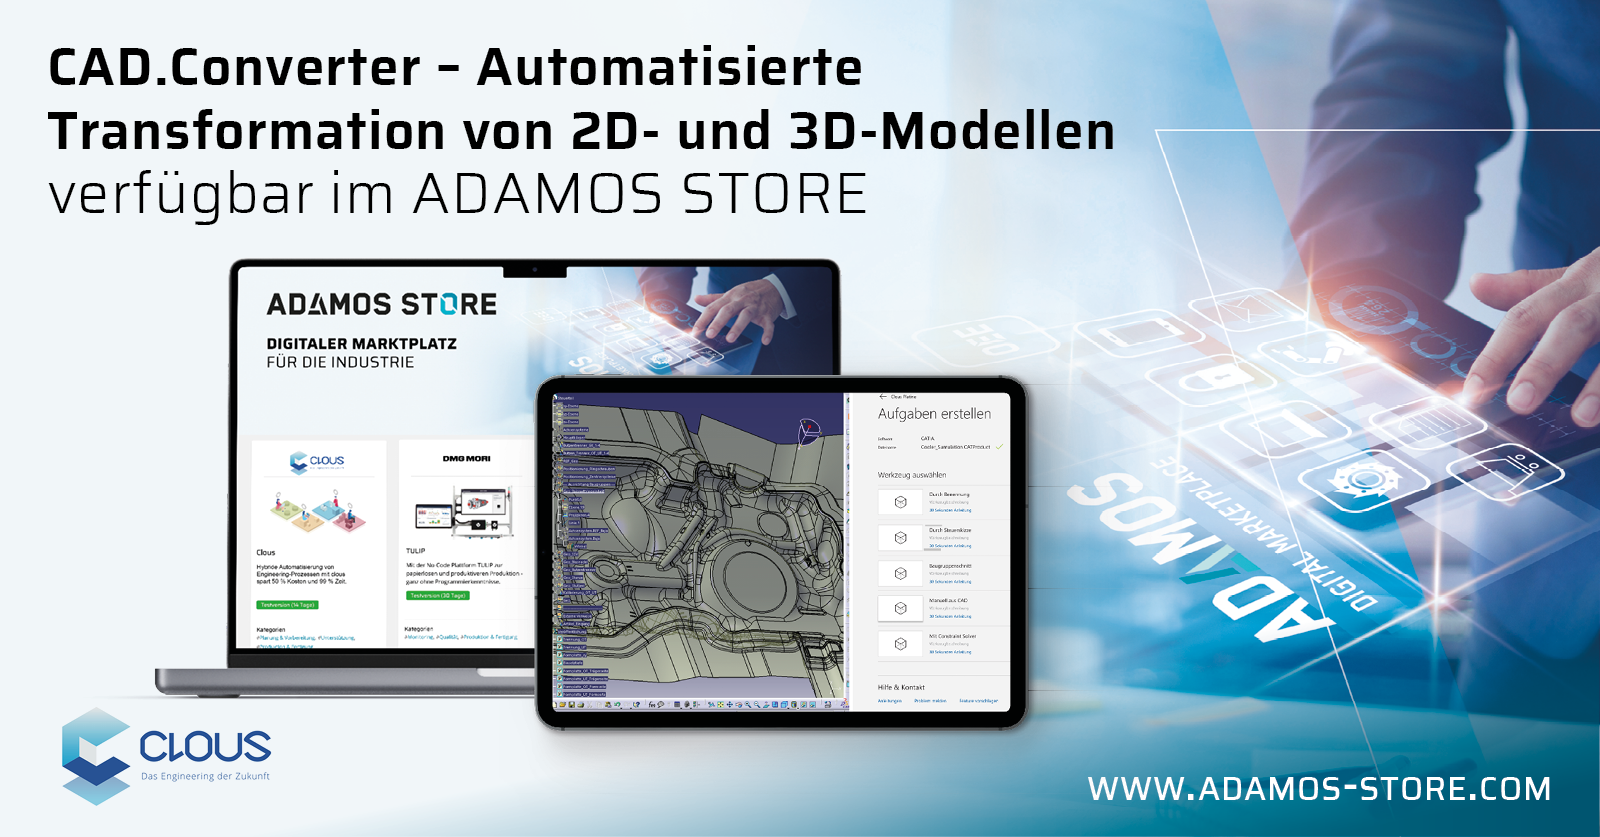 clous CAD.Converter - now in the ADAMOS STORE